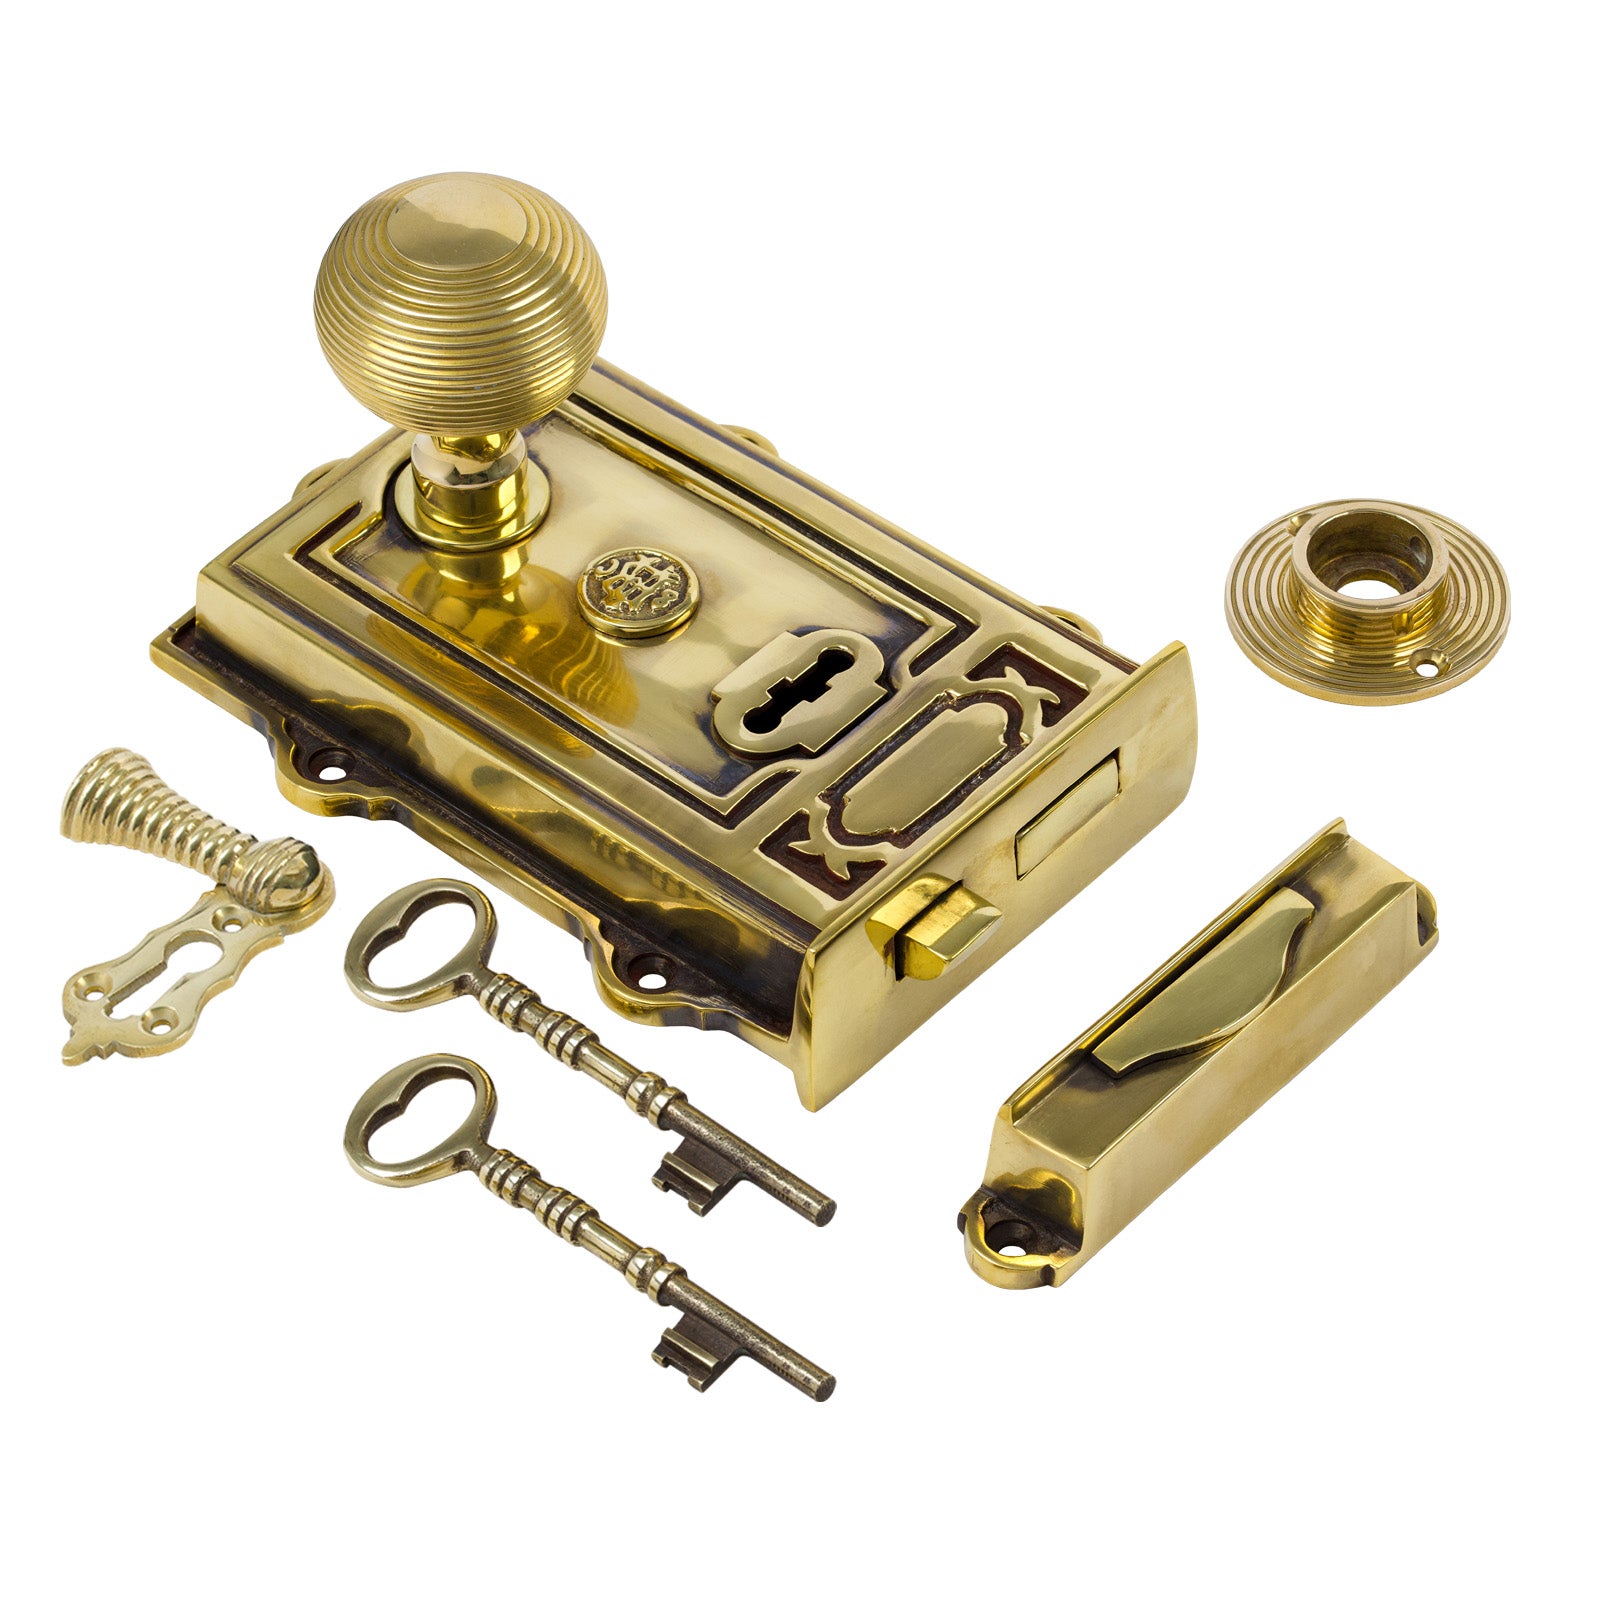 SHOW Image of Ornate Antique Brass Rim Lock with Brass Beehive Door Knob Set - Polished Brass